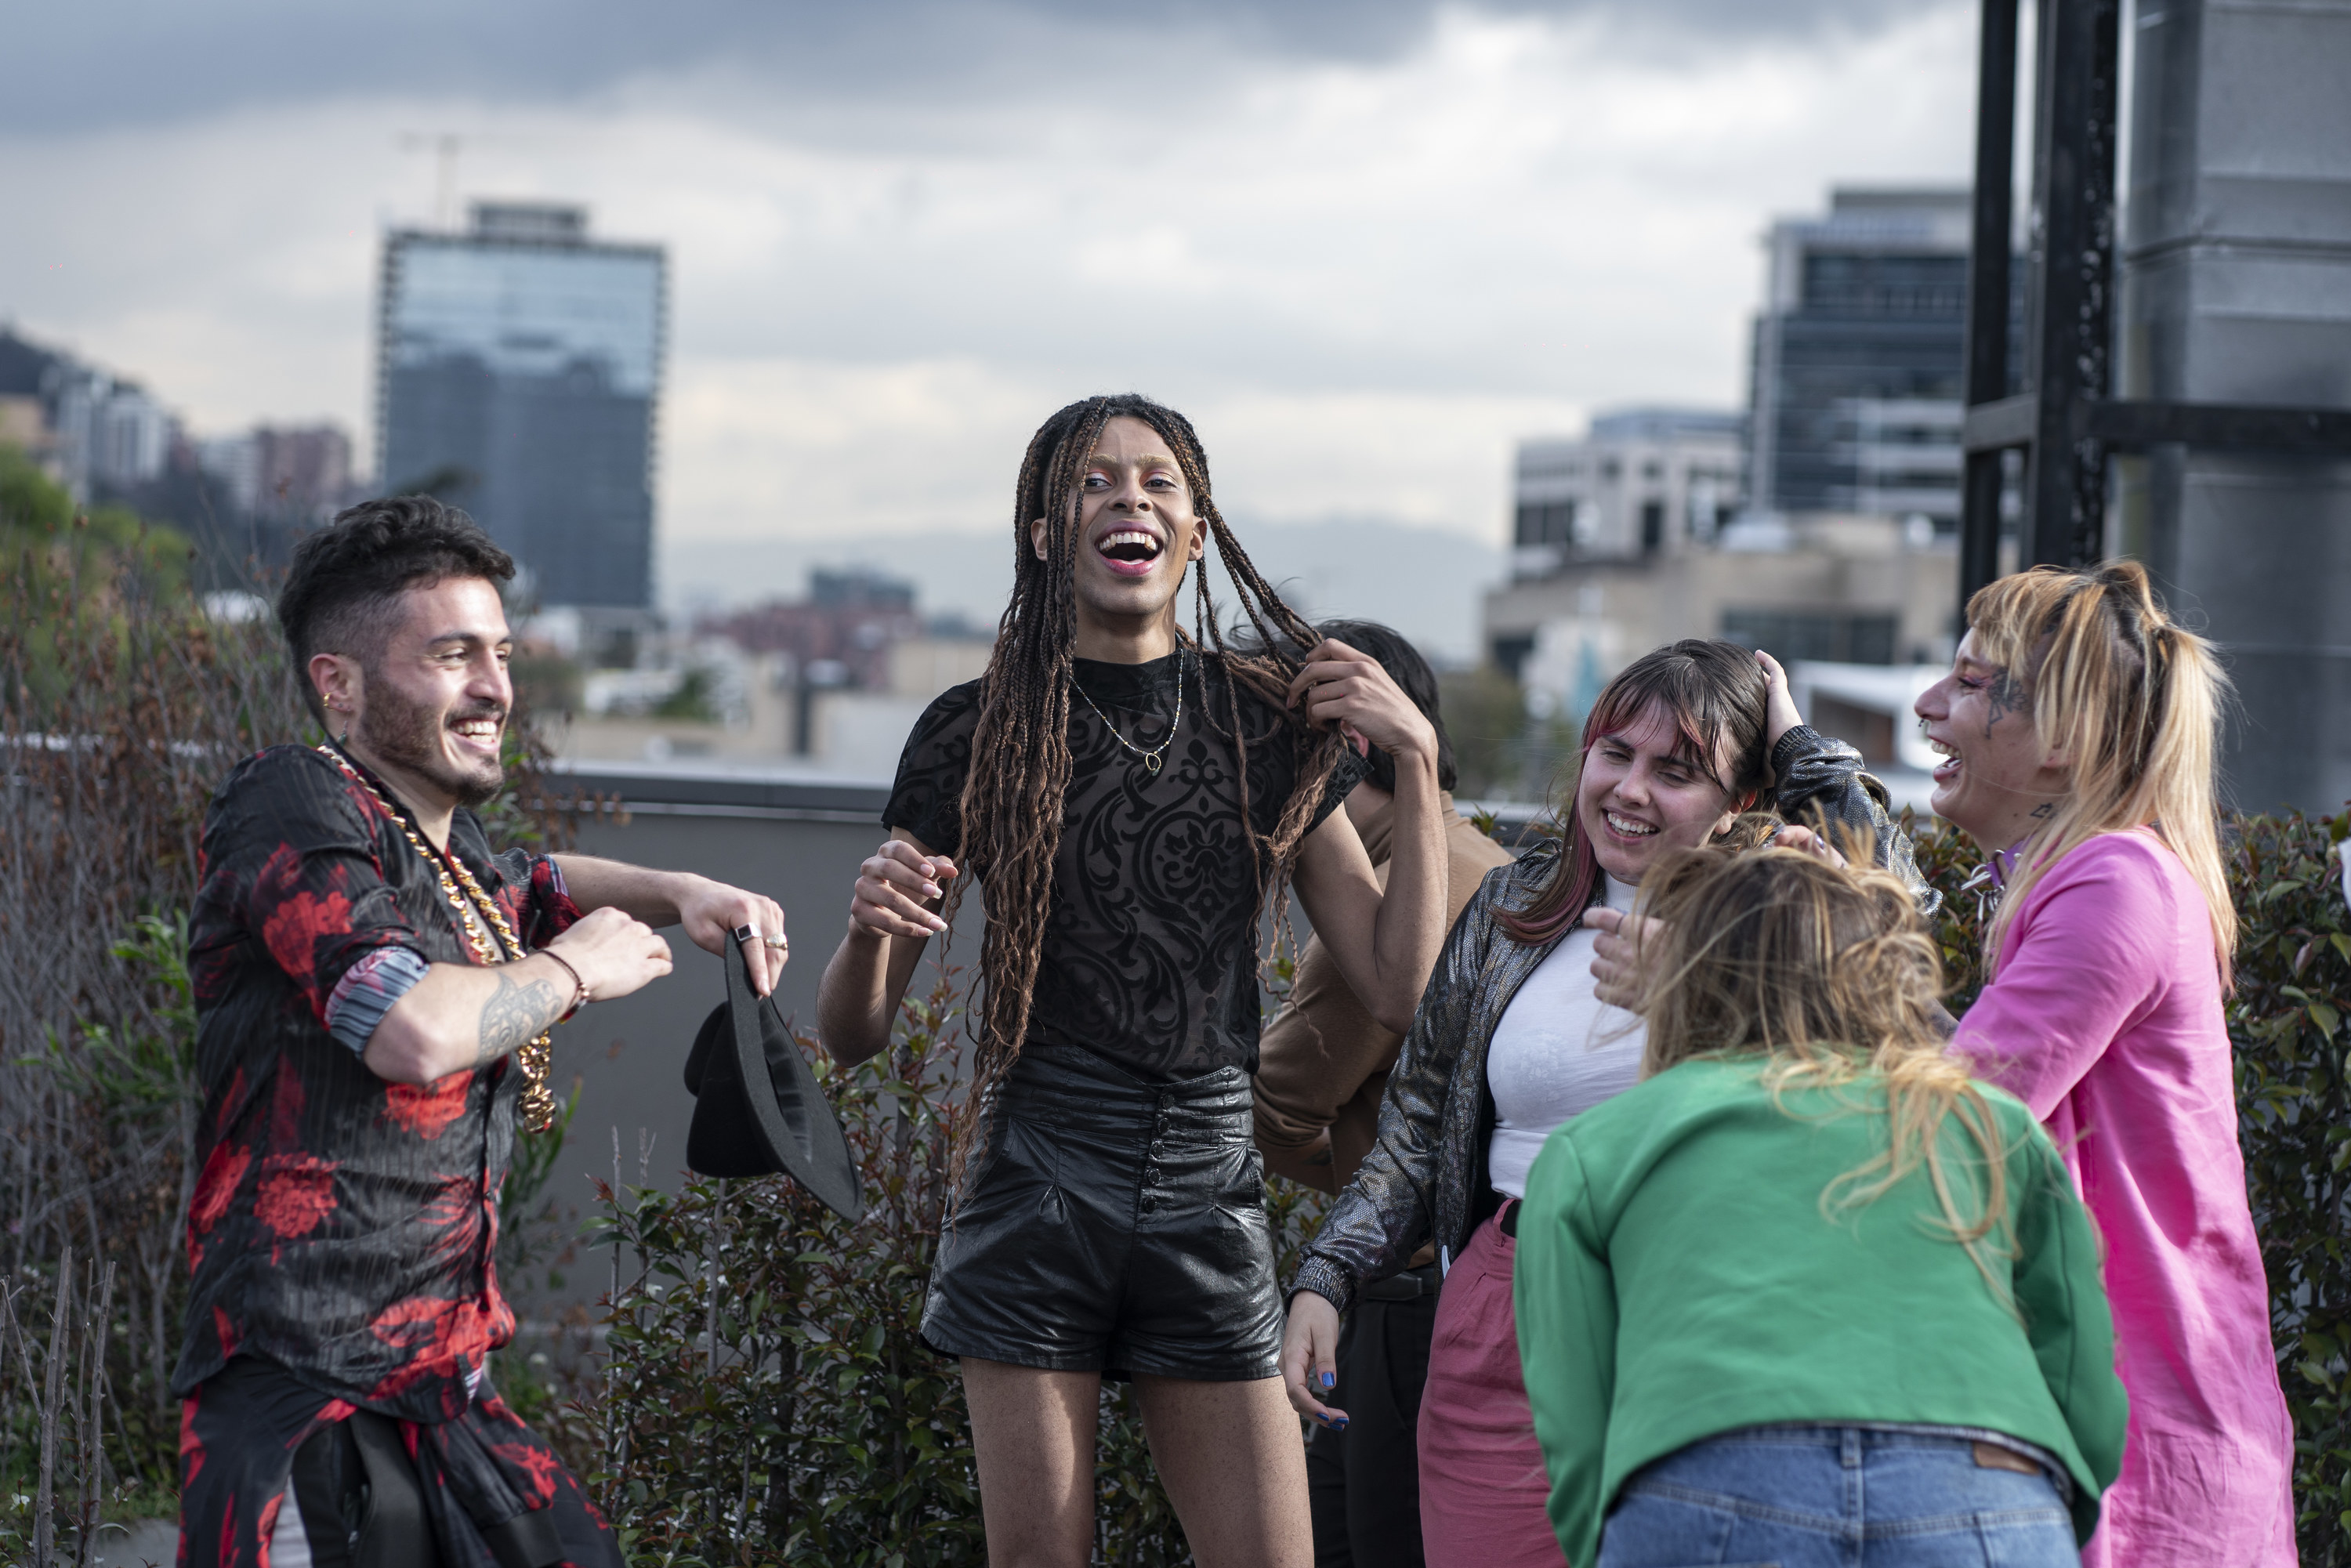 A group of 6 people laughing on the rooftop of a city building.